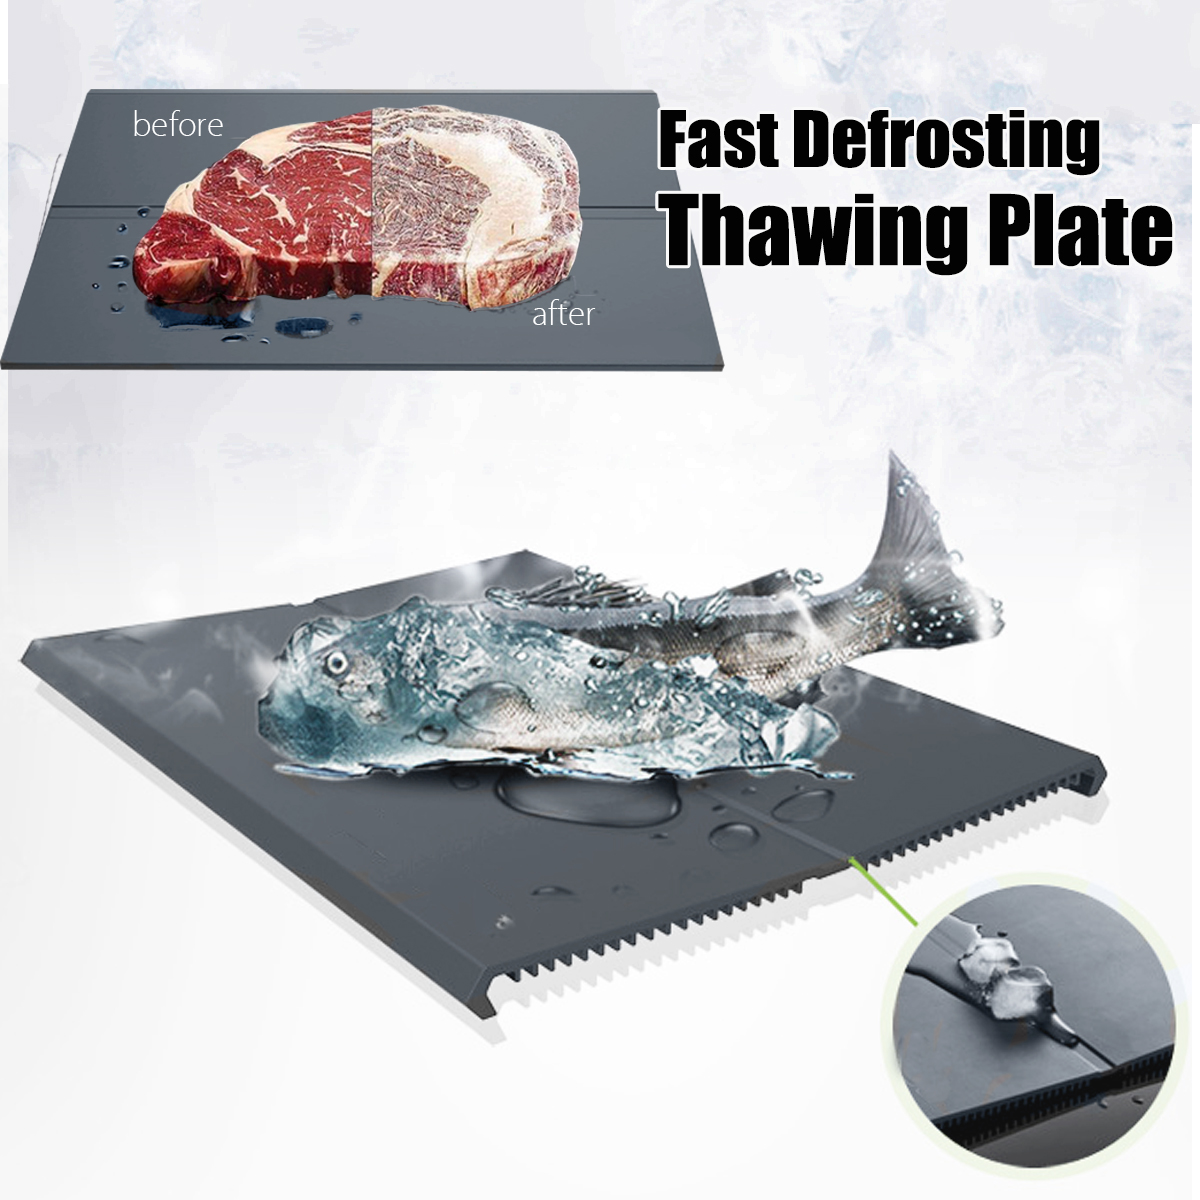 OLDRIVER-Fast-Defrosting-Tray---The-Safest-Way-to-Defrost-Meat-or-Frozen-Food-1304036-1